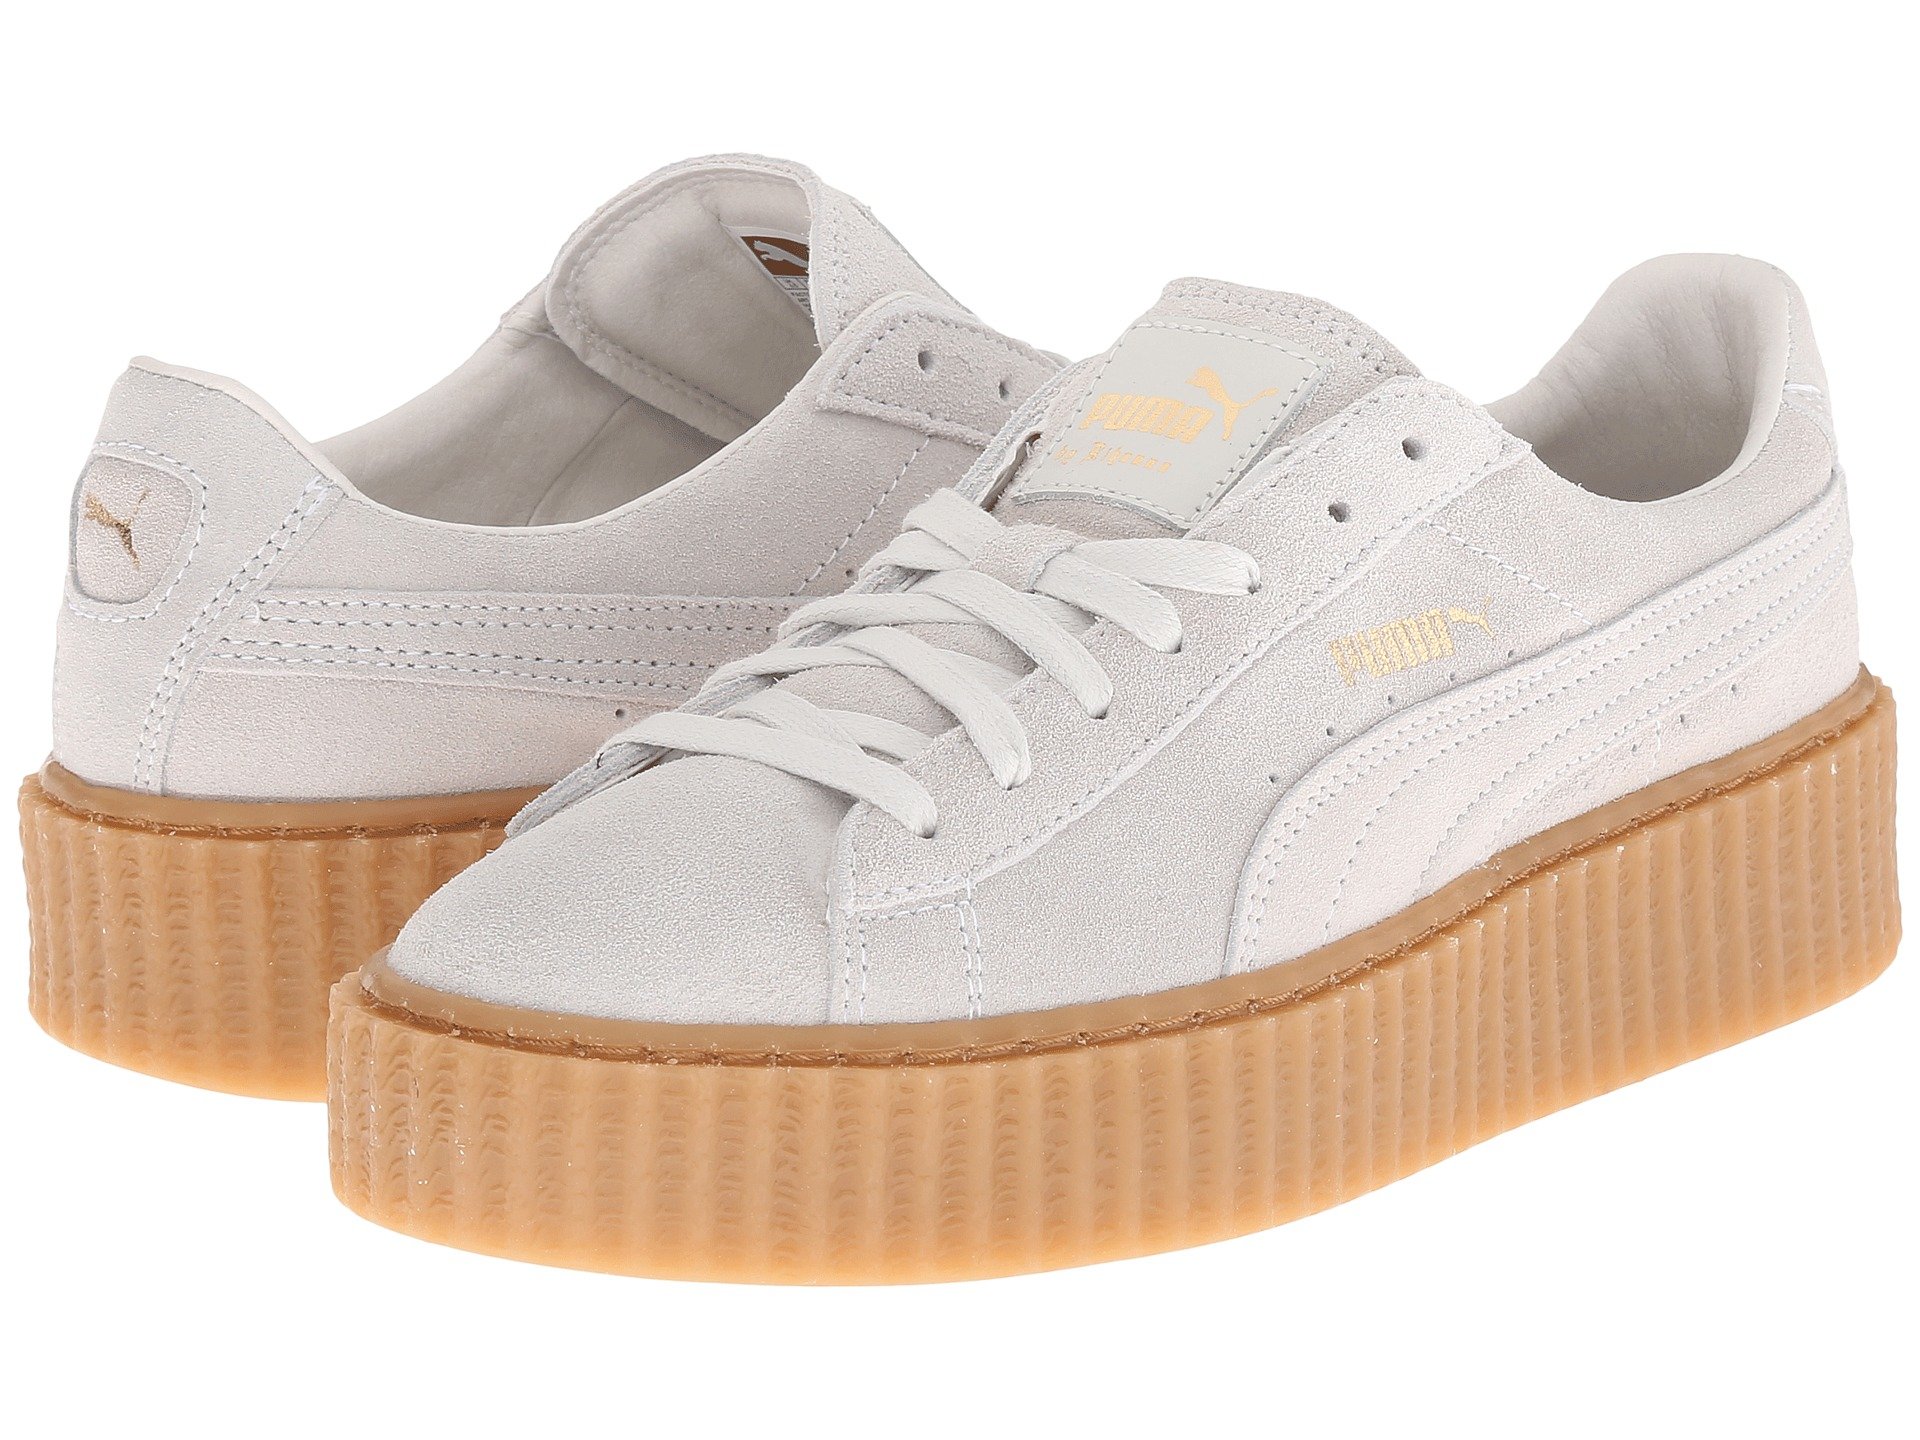 Tegenslag Herhaald Antecedent PUMA Rihanna X Suede Creepers in White | Lyst